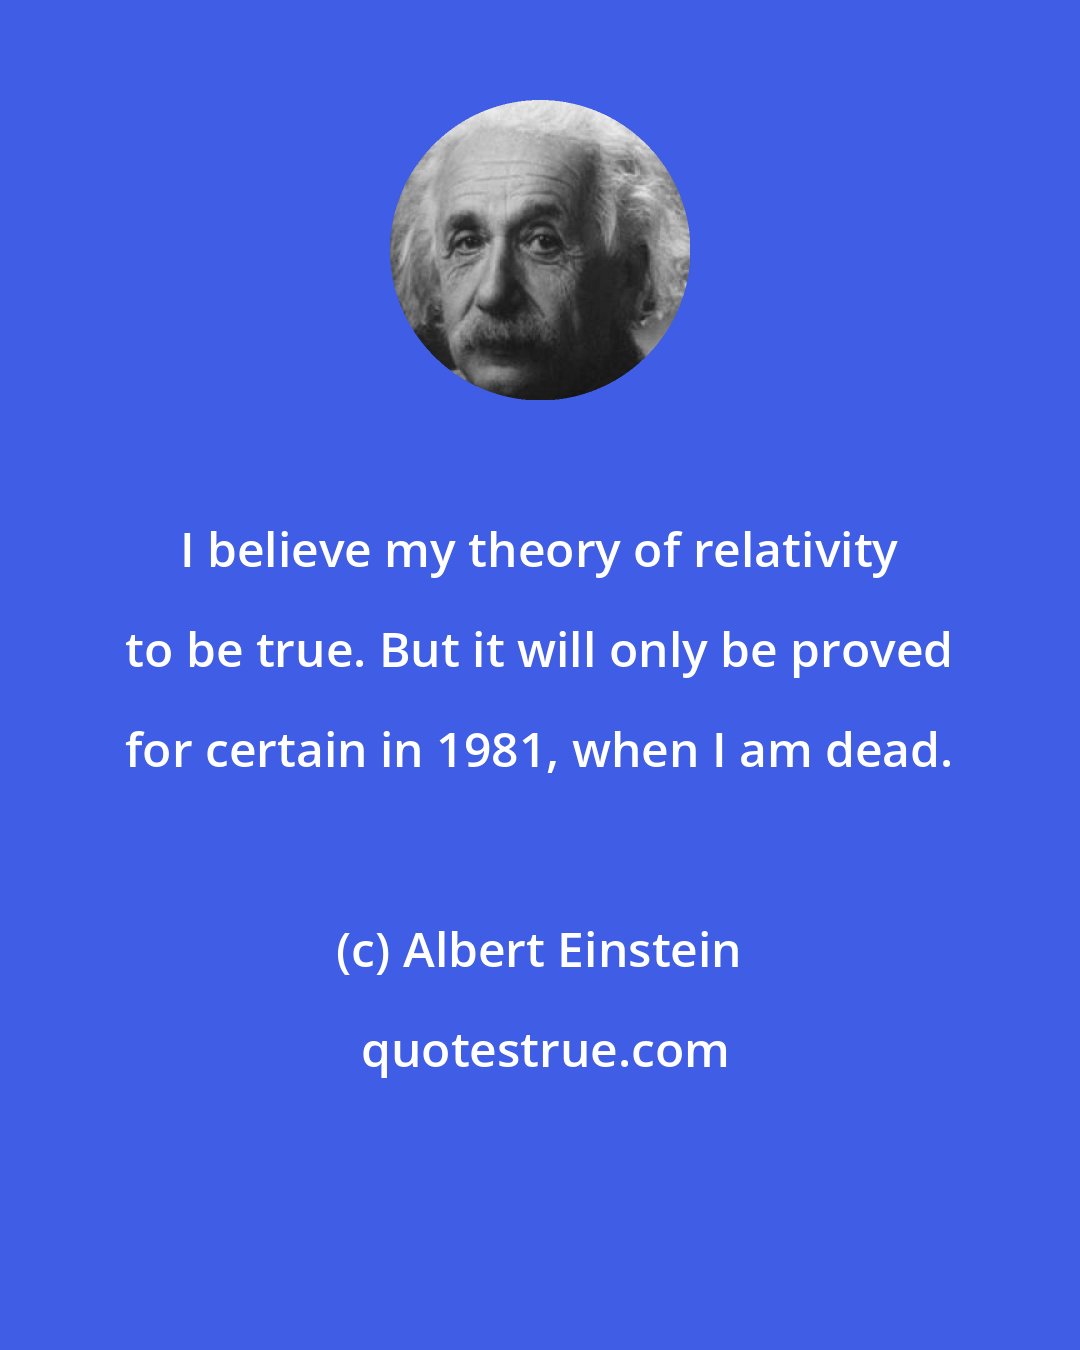 Albert Einstein: I believe my theory of relativity to be true. But it will only be proved for certain in 1981, when I am dead.